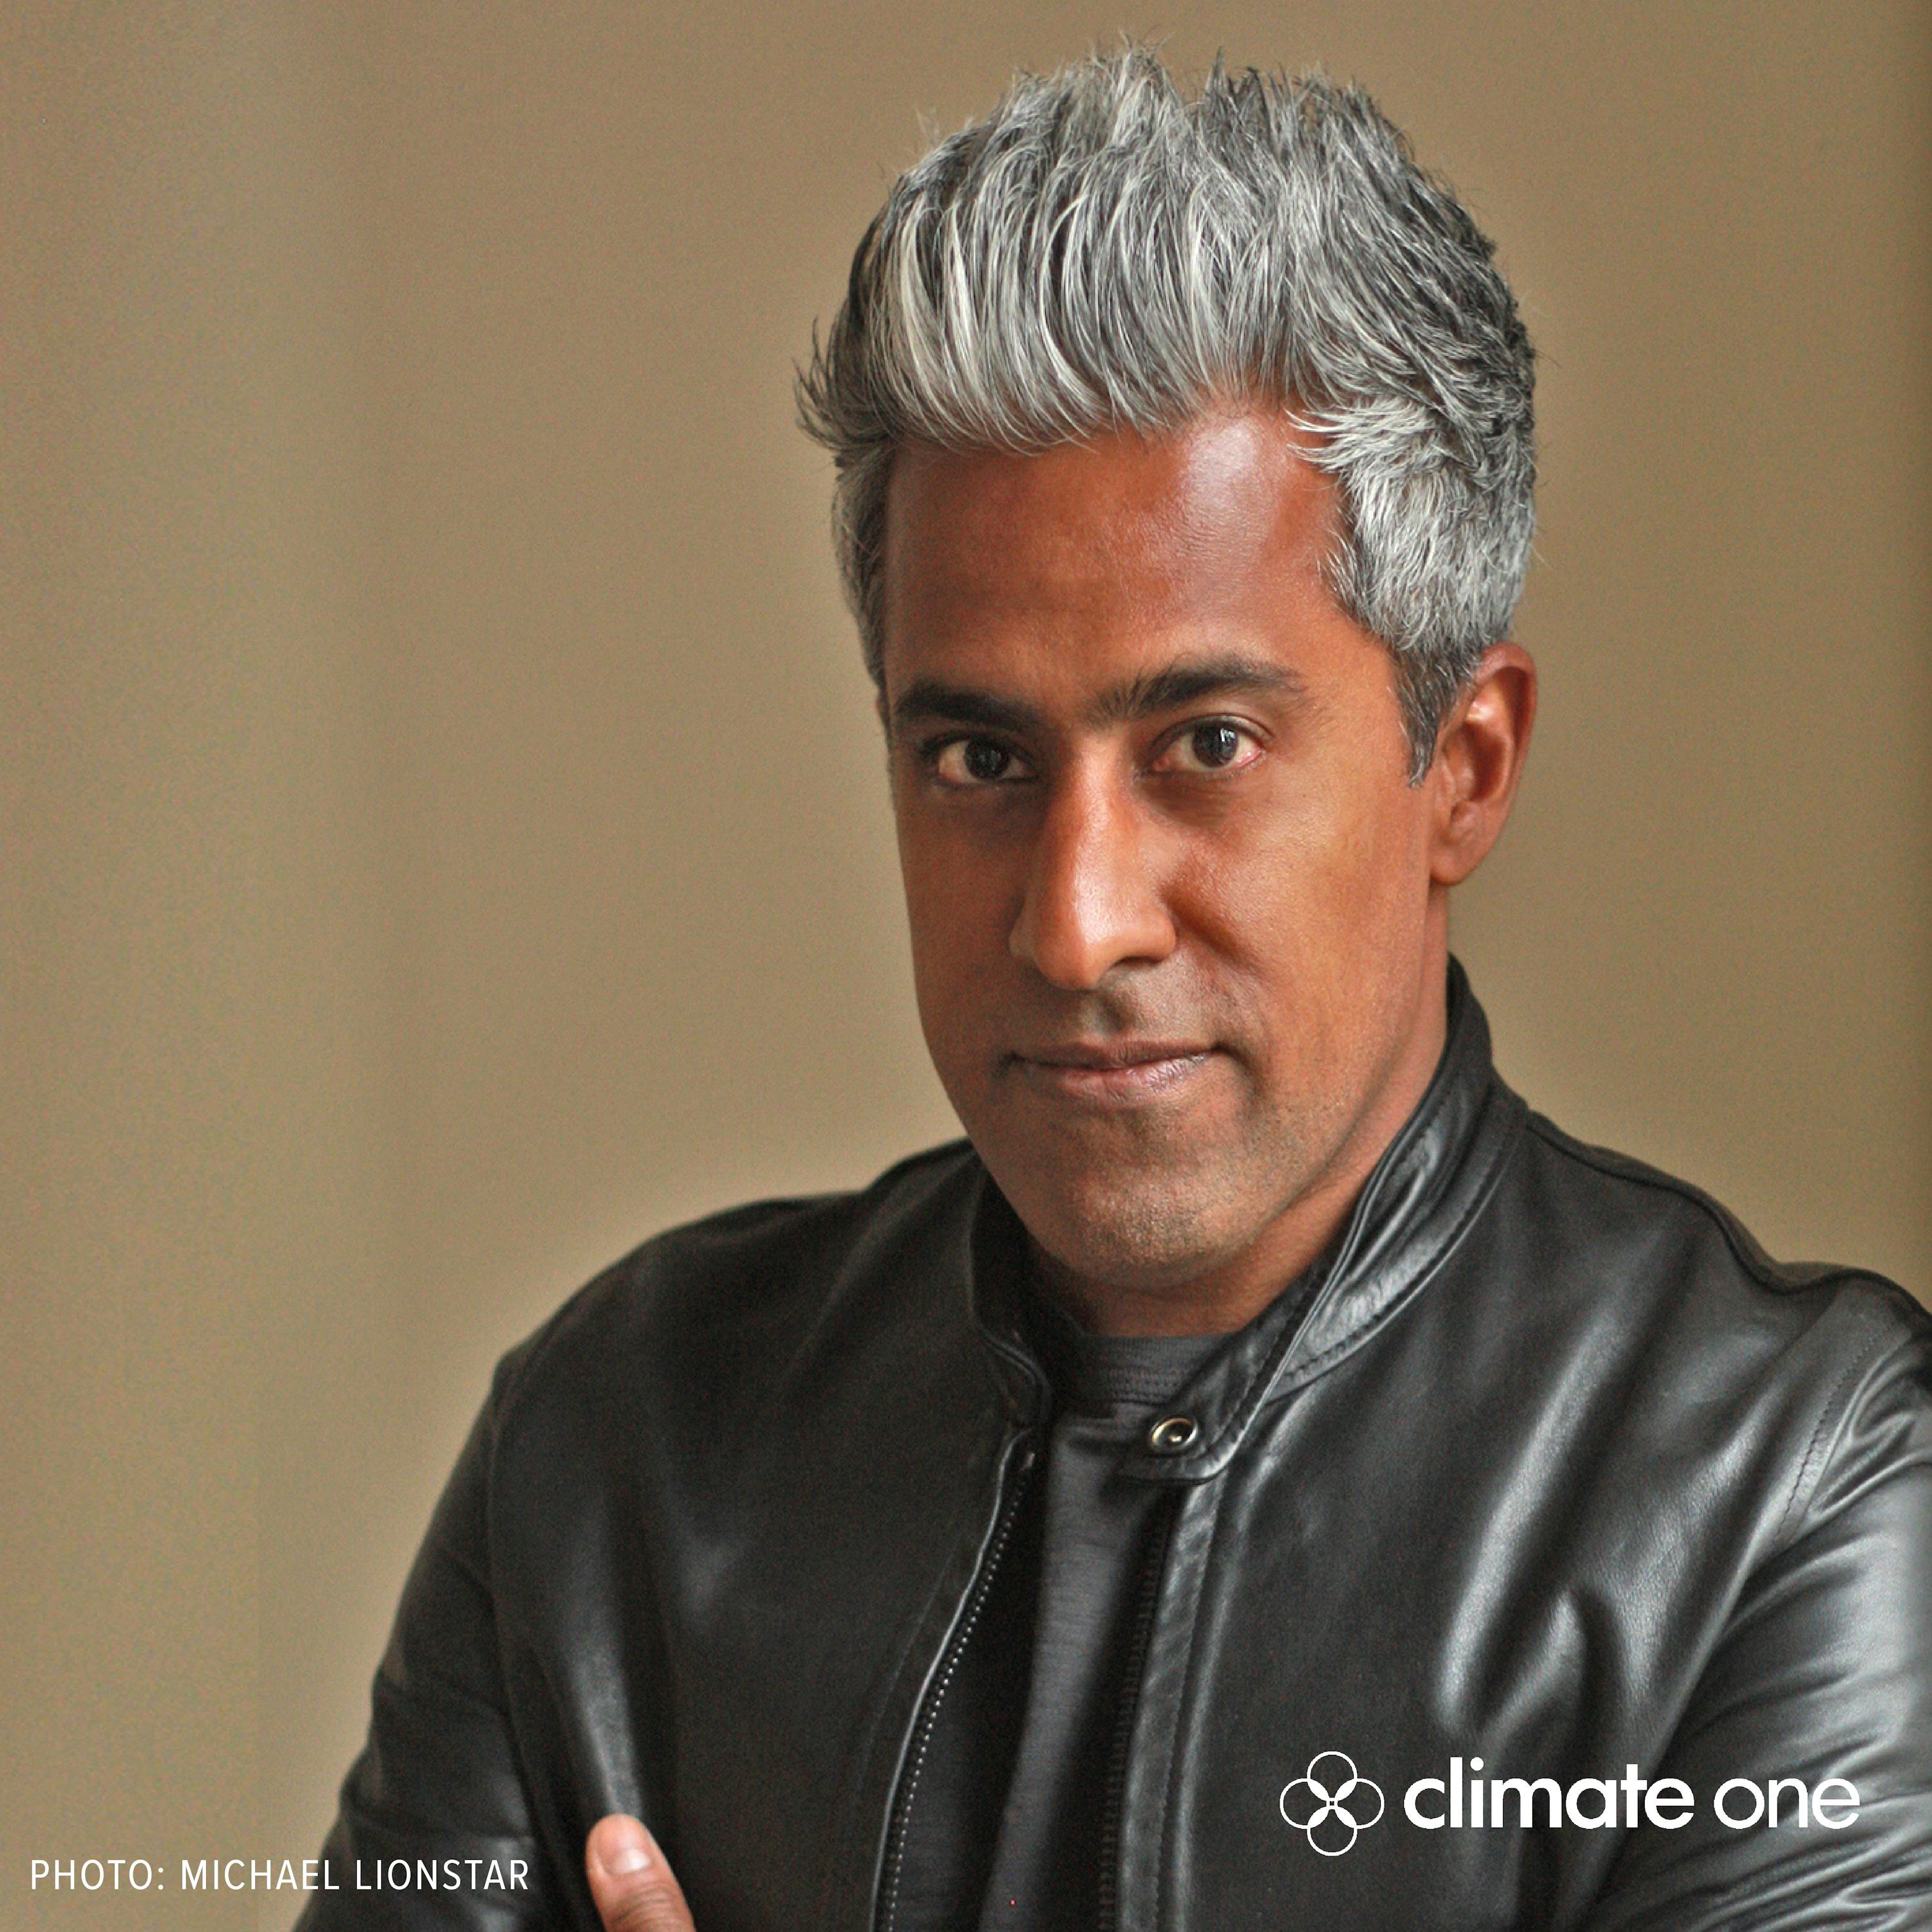 REWIND: Anand Giridharadas: Persuaders in a Hot and Polarized World